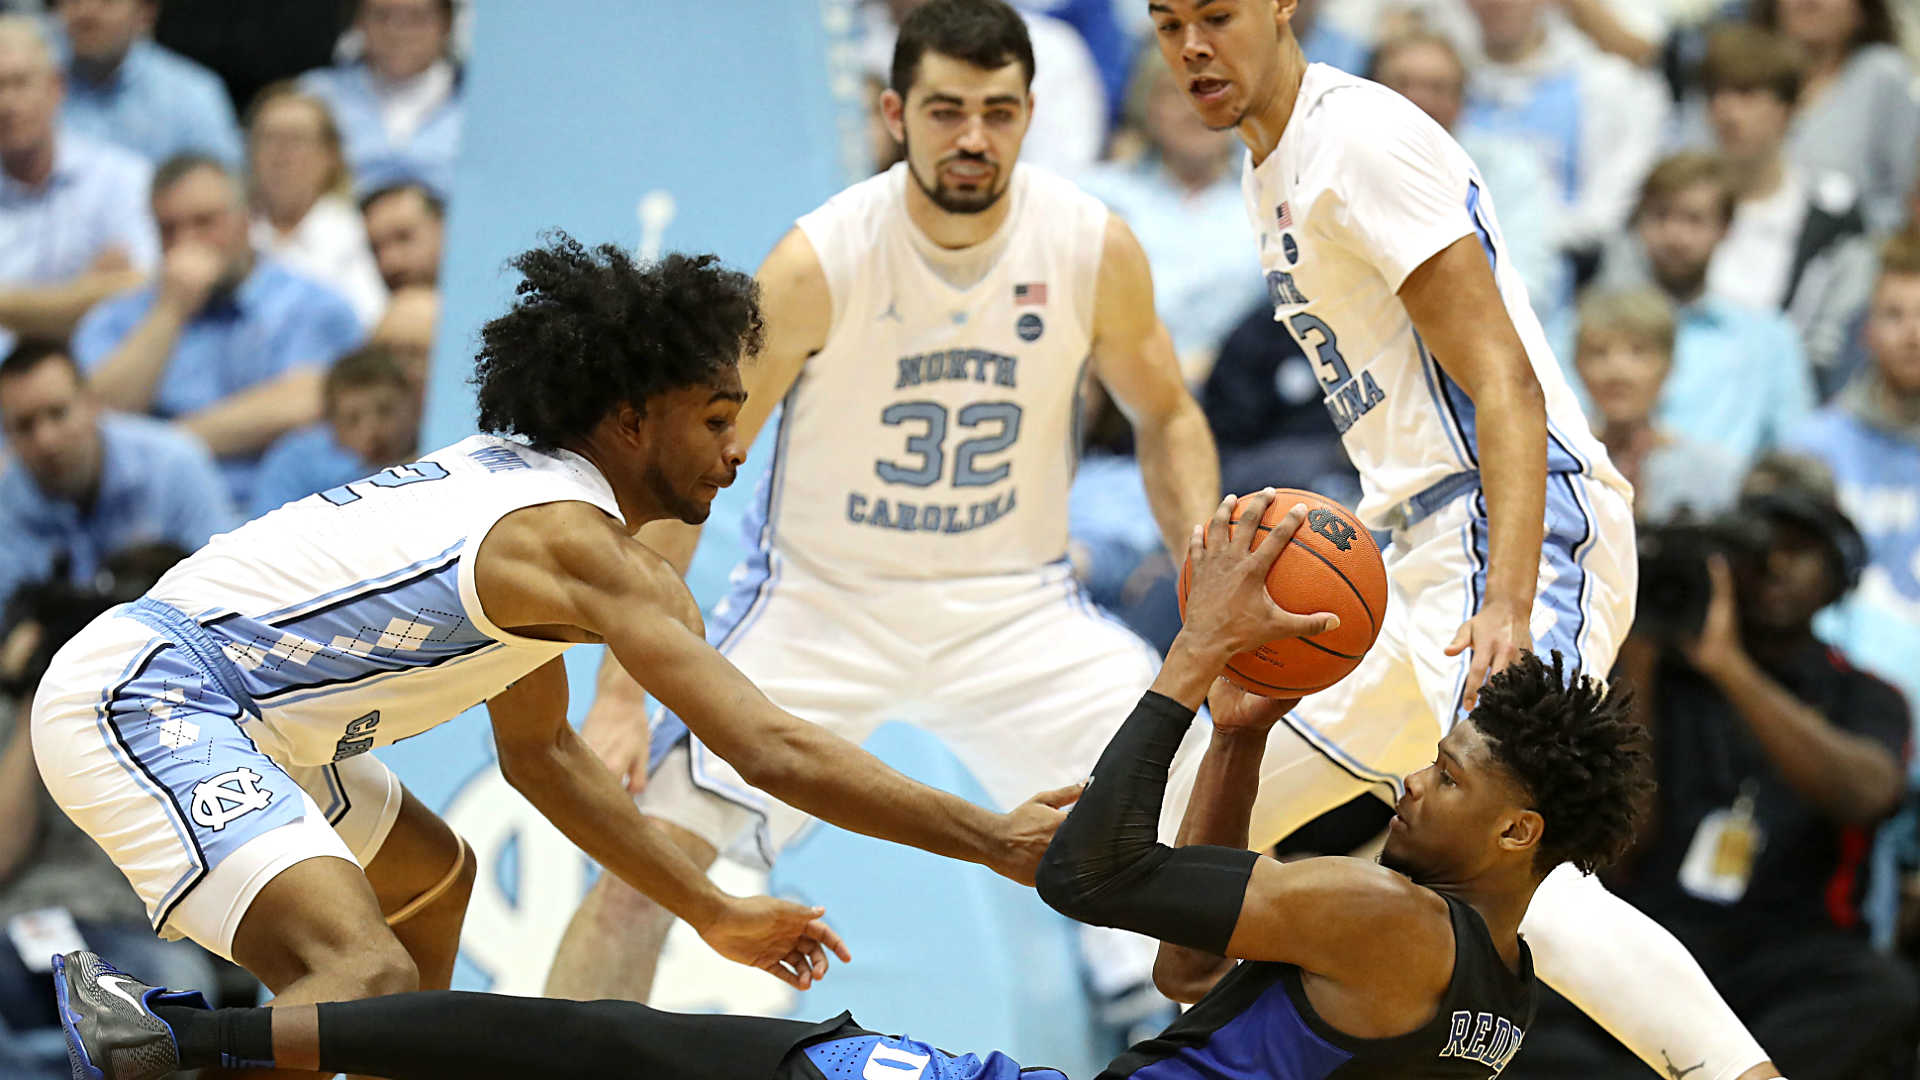 Duke vs. UNC results: Coby White leads Heels to sweep of Blue Devils | NCAA Basketball ...1920 x 1080